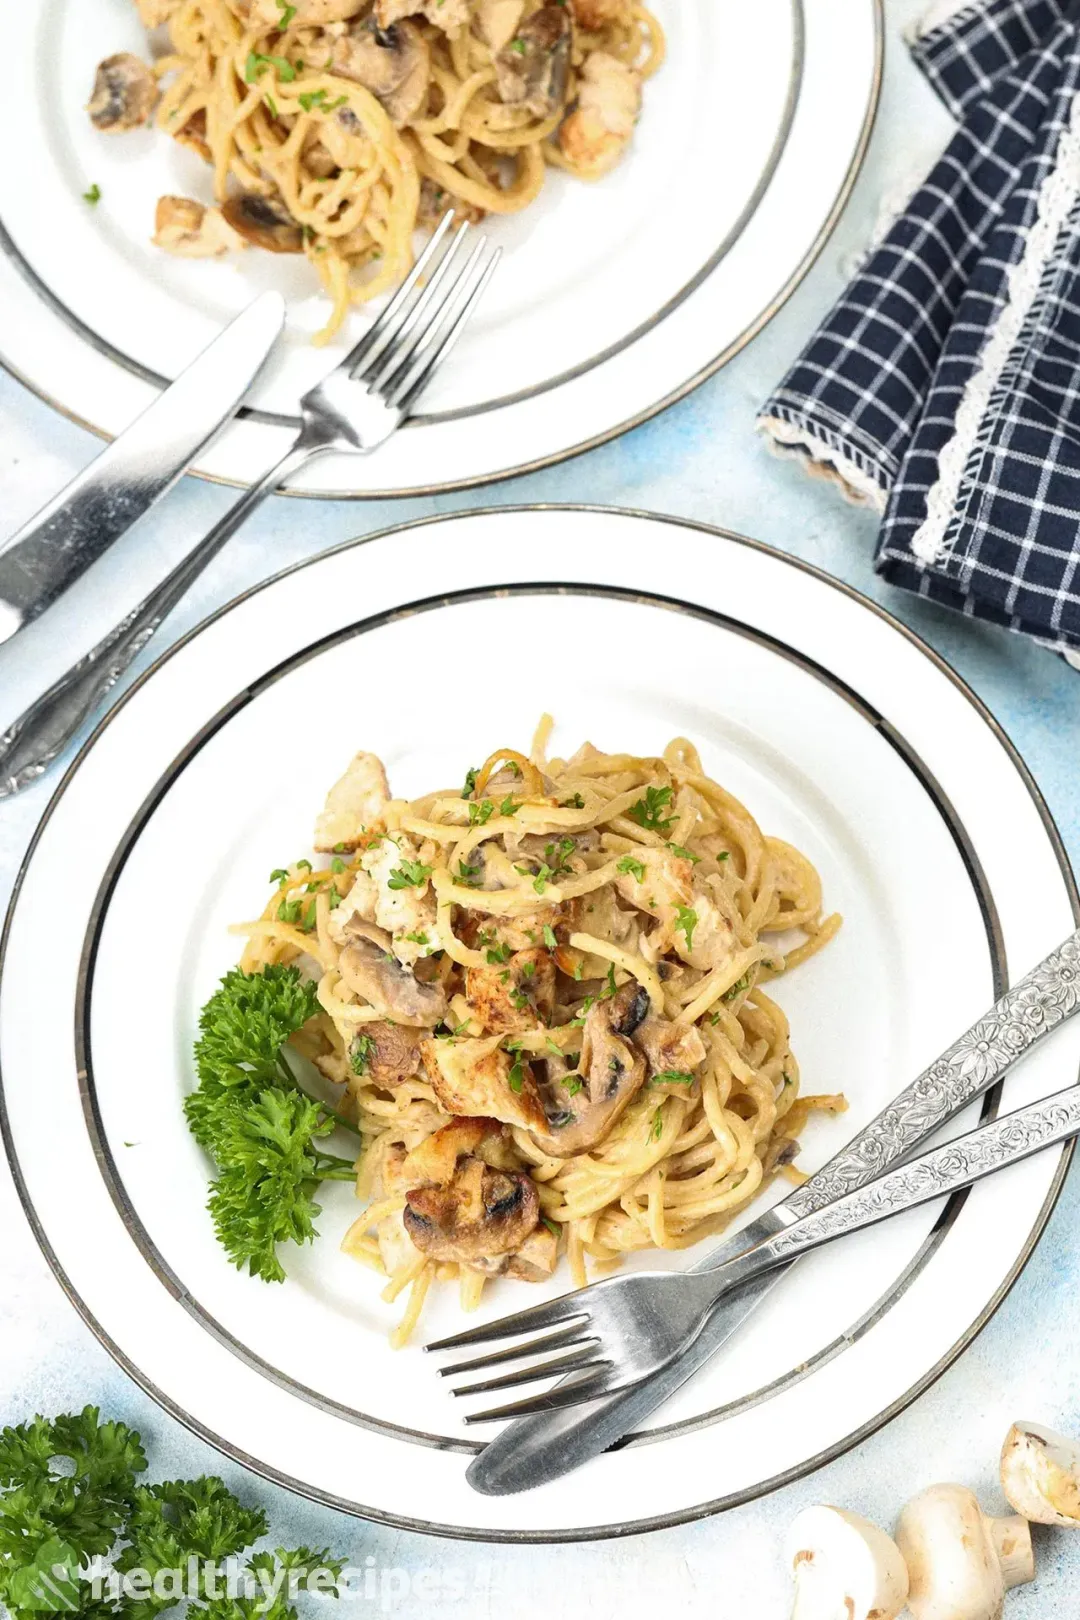 What to Serve With Chicken Tetrazzini